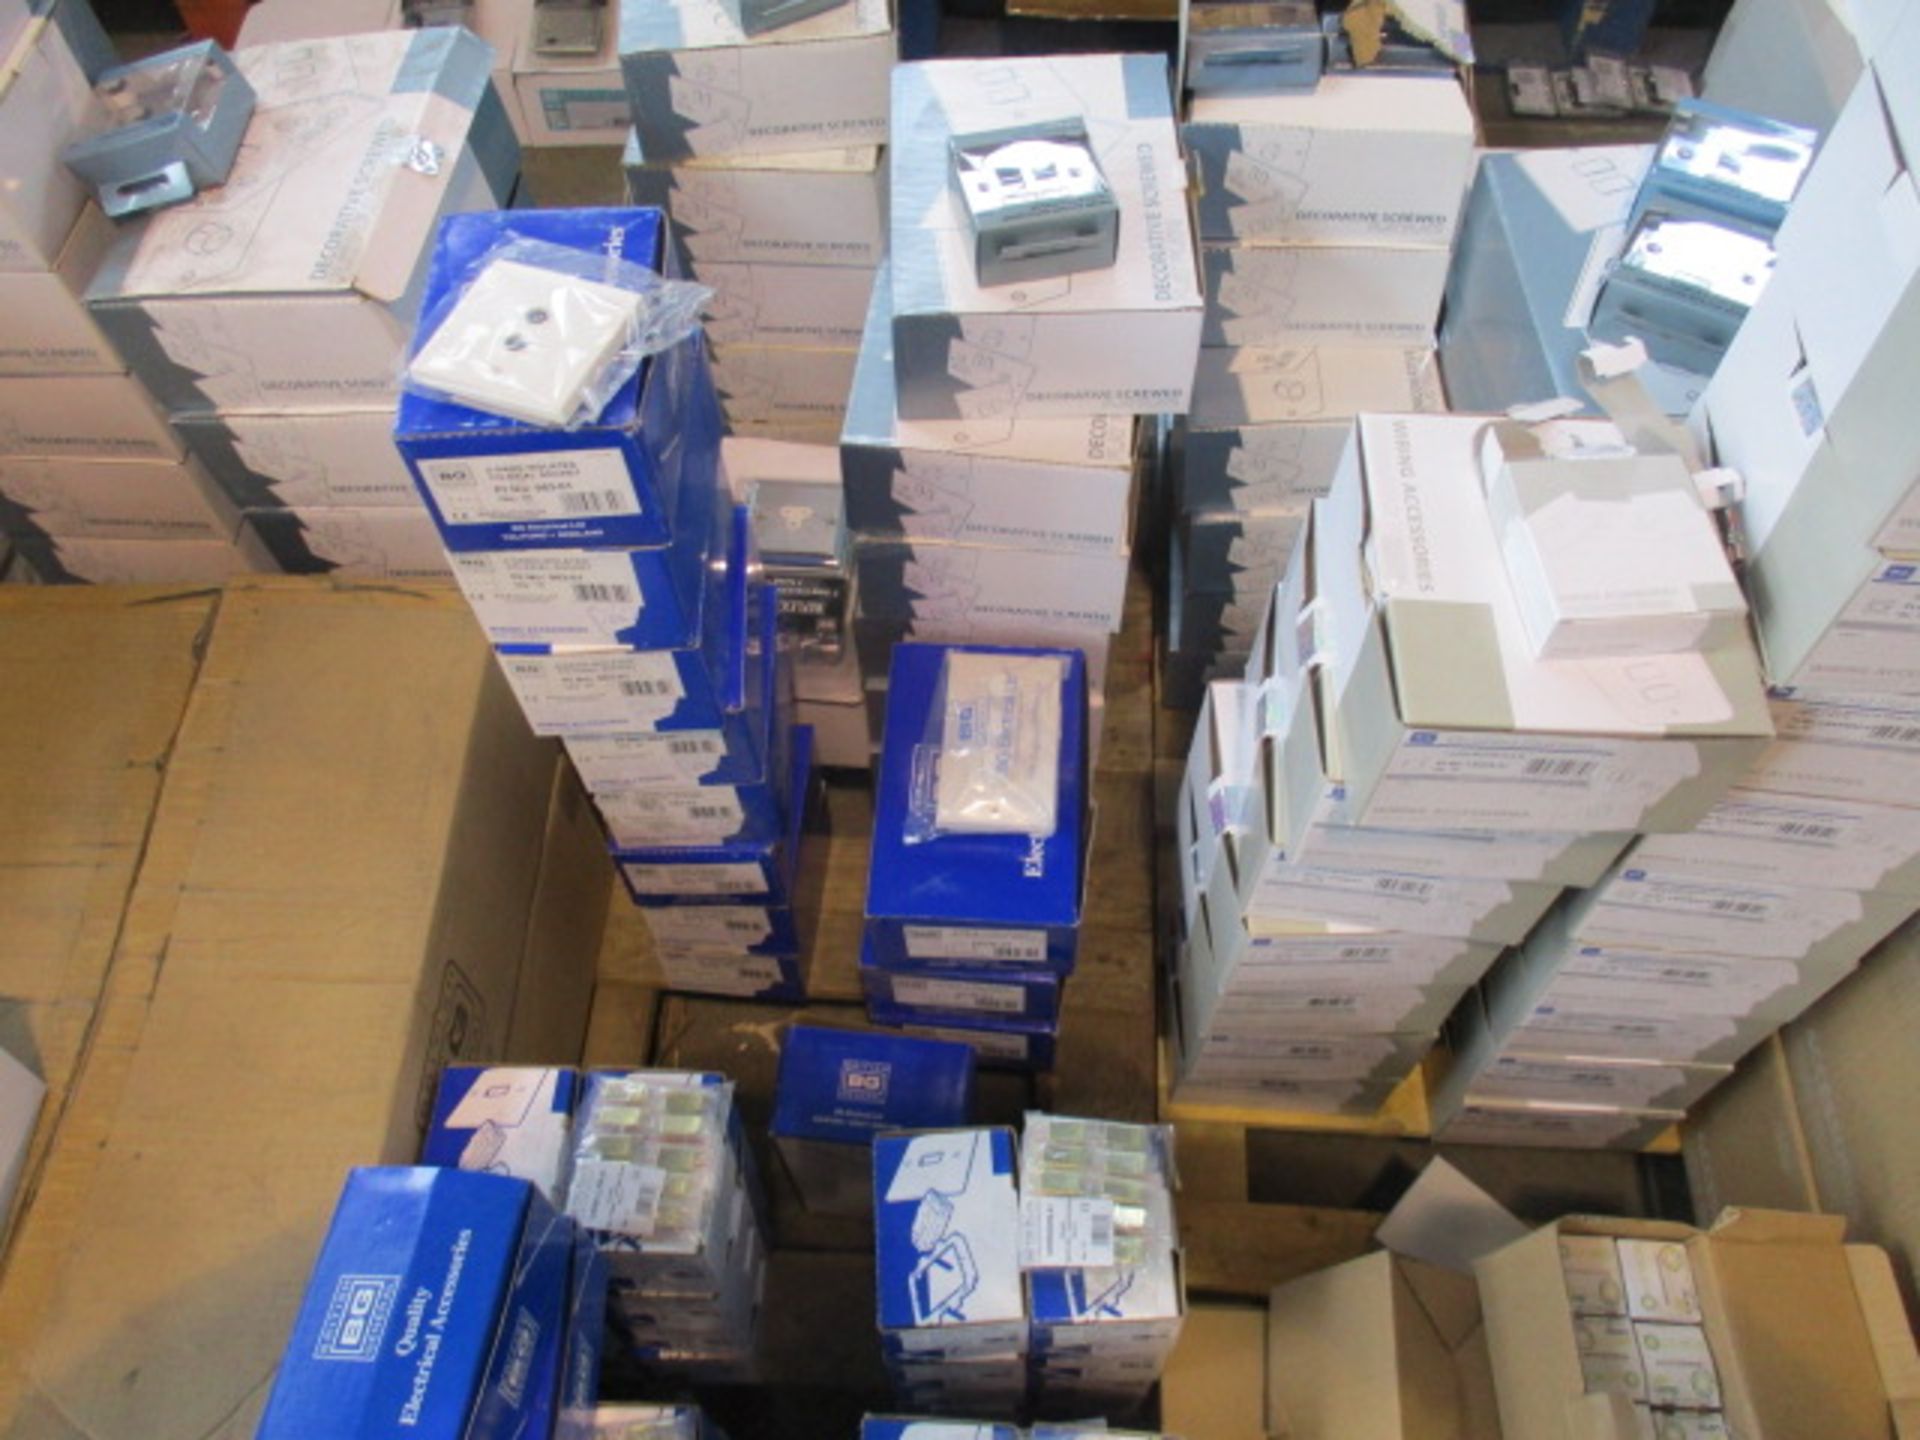 100 pcs - Assorted / electrical sockets - variety - will be selected from stock at Random - All